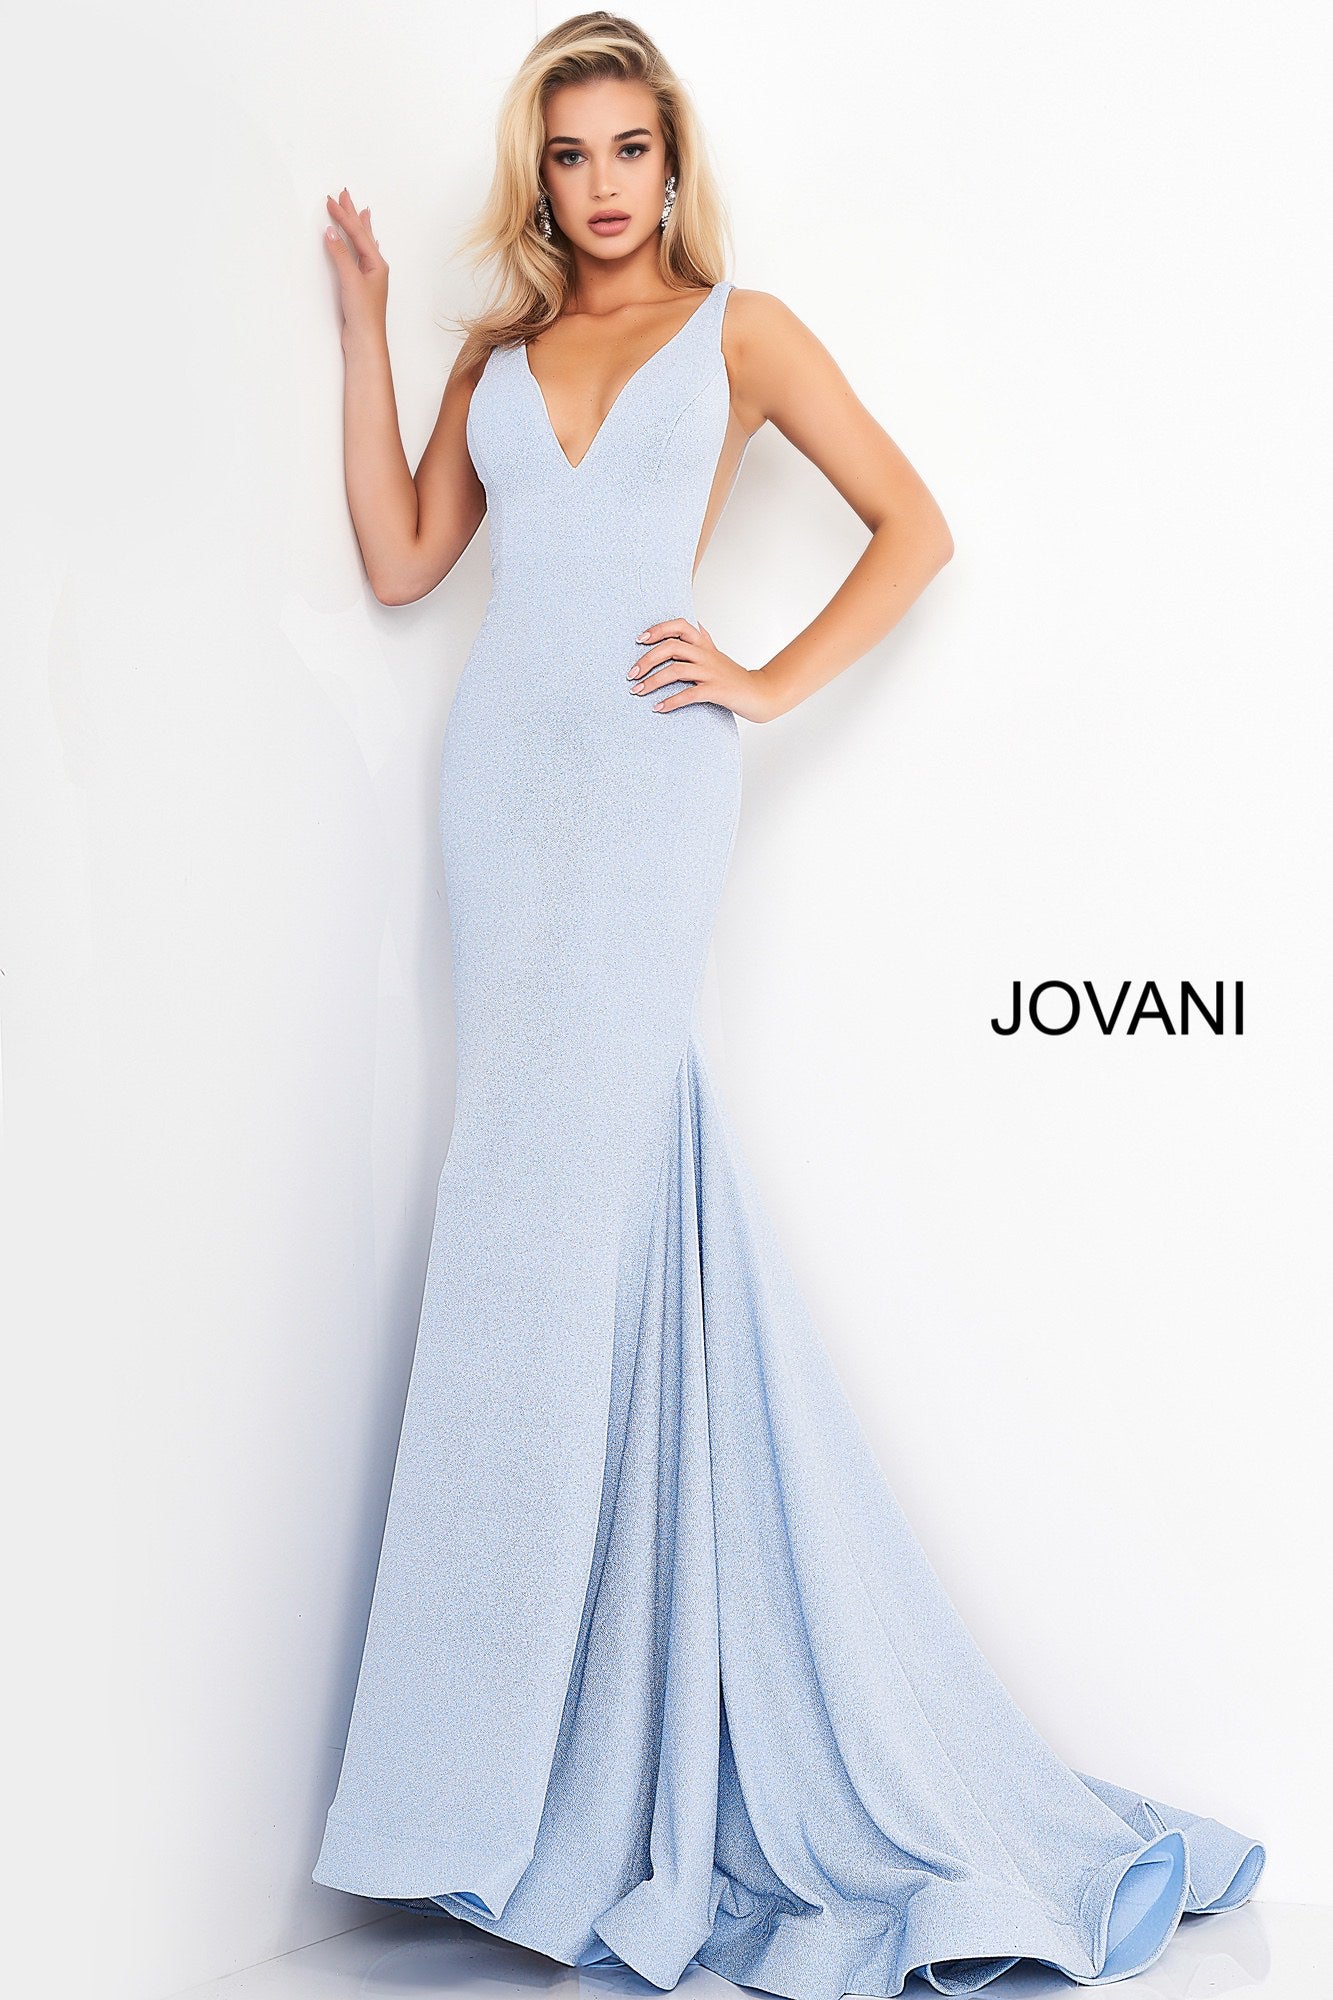 Jovani 02132 Blue V Neck Jovani Prom Dress 02132 Long Sexy Fitted Mermaid Prom Dress, Deep V Plunging Neckline with a Fit & Flare Shape Leading to a lush trumpet skirt with horse hair trim. Stretch Glitter fabric adds a touch of glam and a comfortable wear all night long!  Available Sizes: 00-24  Available Colors: blue, champagne, orange, pink